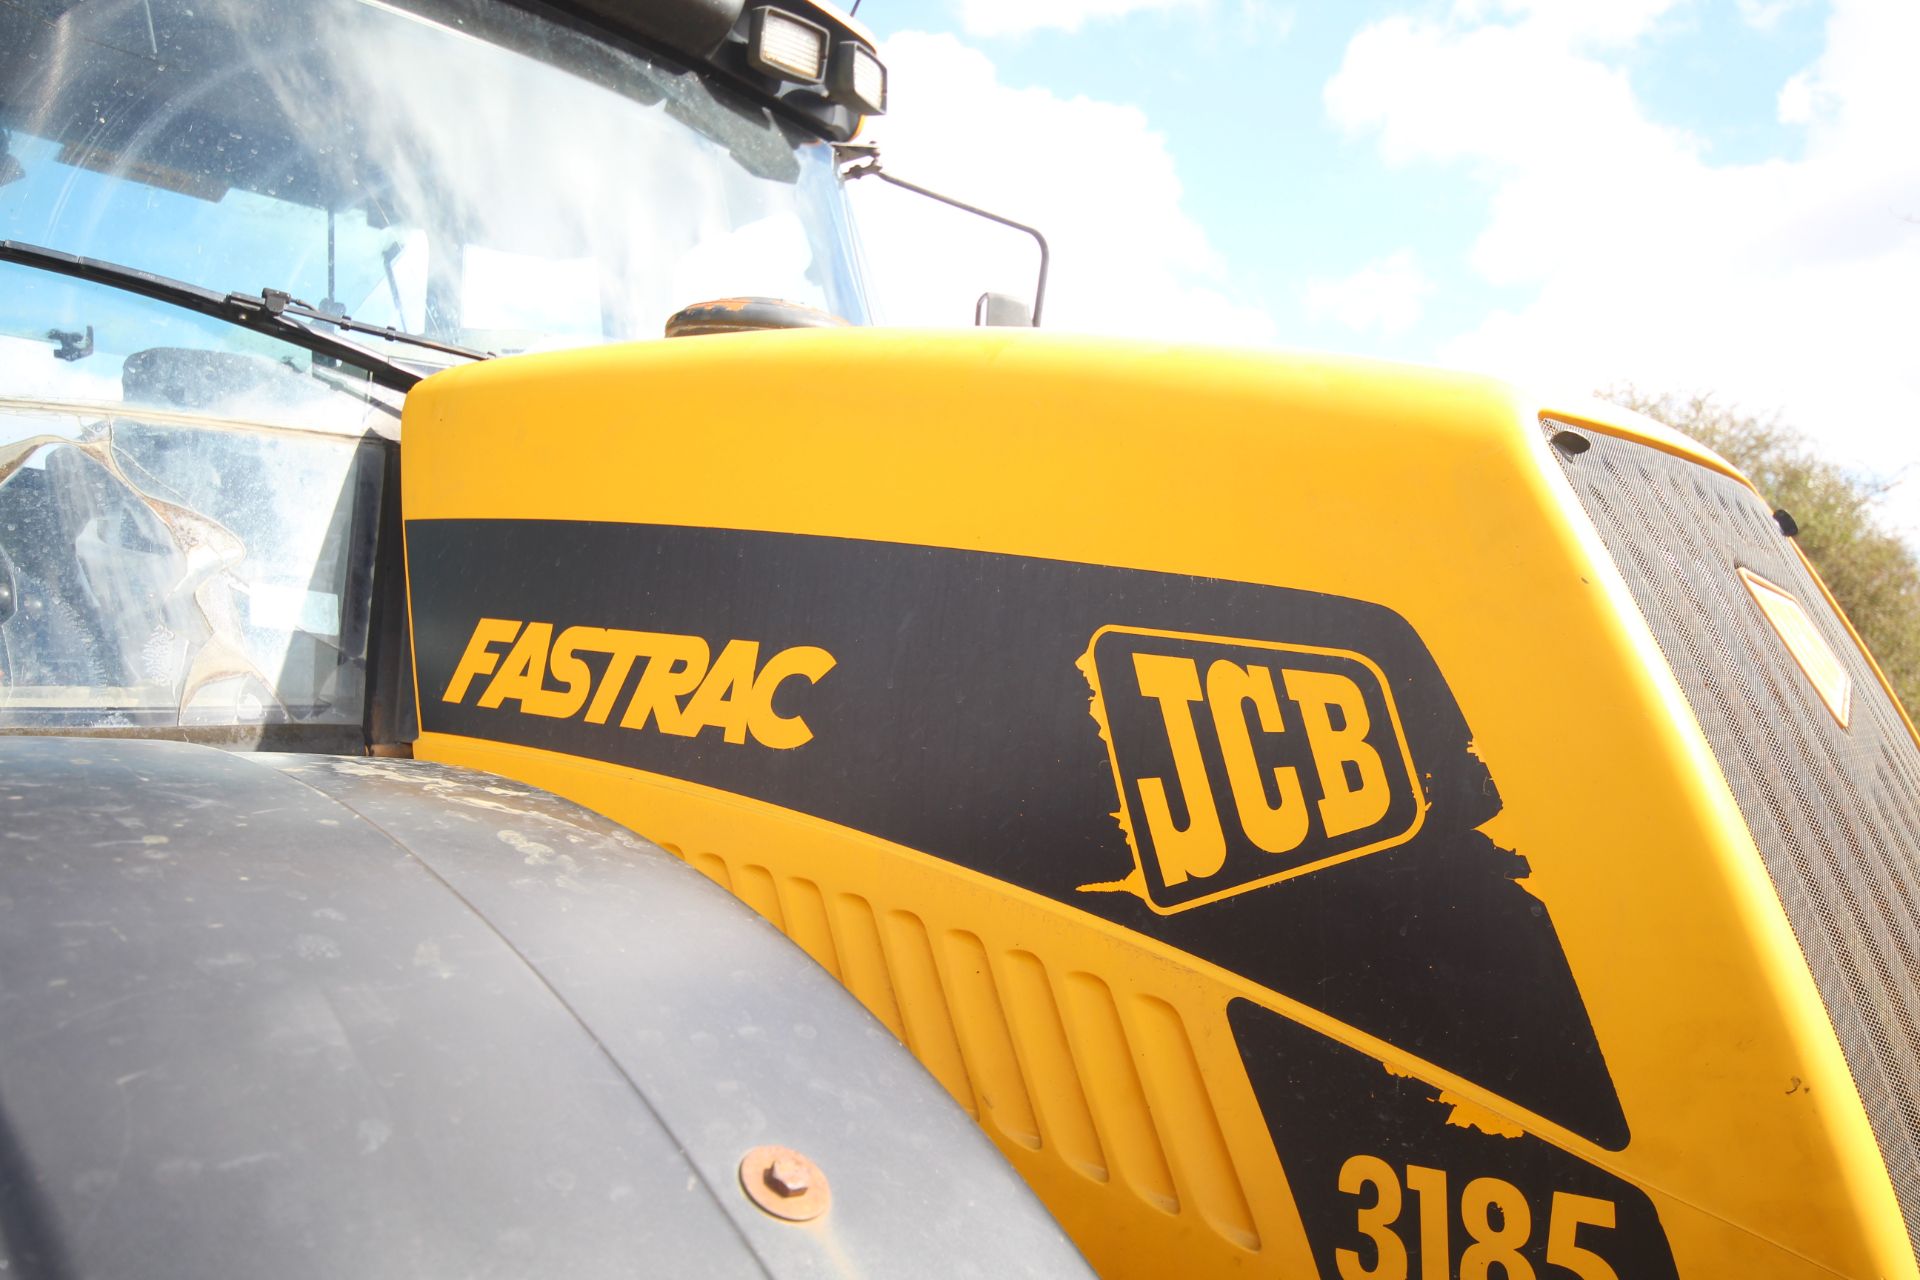 JCB Fastrac 3185 Autoshift 4WD tractor. Registration X642 AHT. Date of first registration 04/09/ - Image 50 of 71